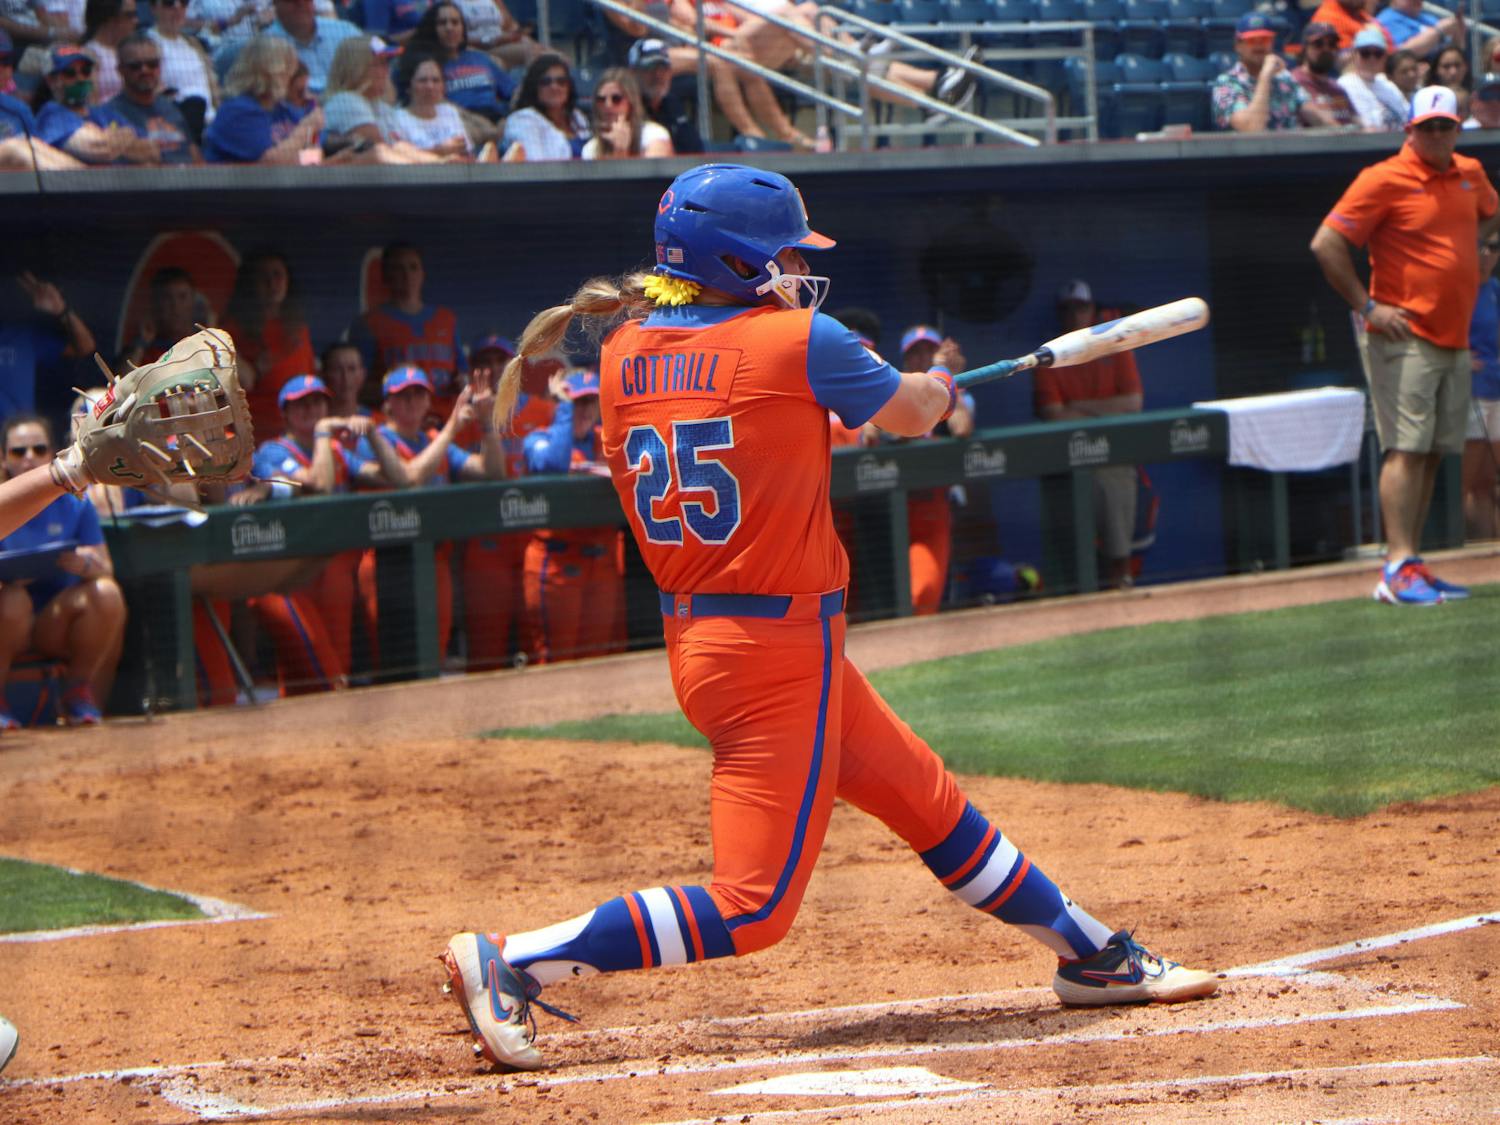 Julia Cottrill swings Friday against USF. Cottrill helped lead the Gators to an 8-0 win over the Bulls Sunday.